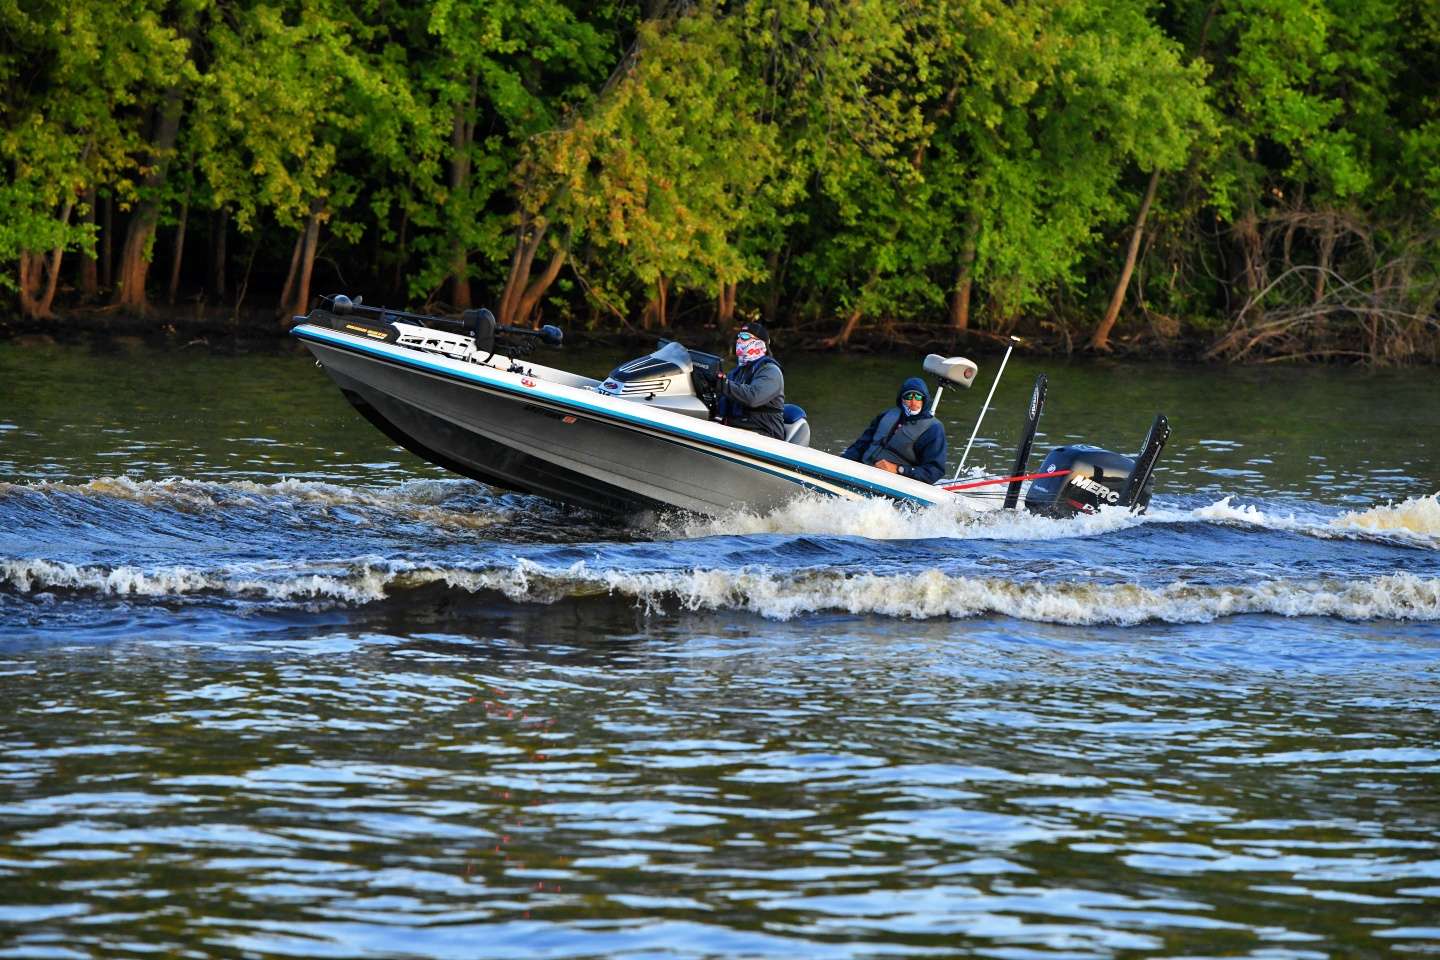 It's Day 1 of the 2019 Basspro.com Bassmaster Open at Mississippi River, and anglers fire up their motors to head to their starting spots. 